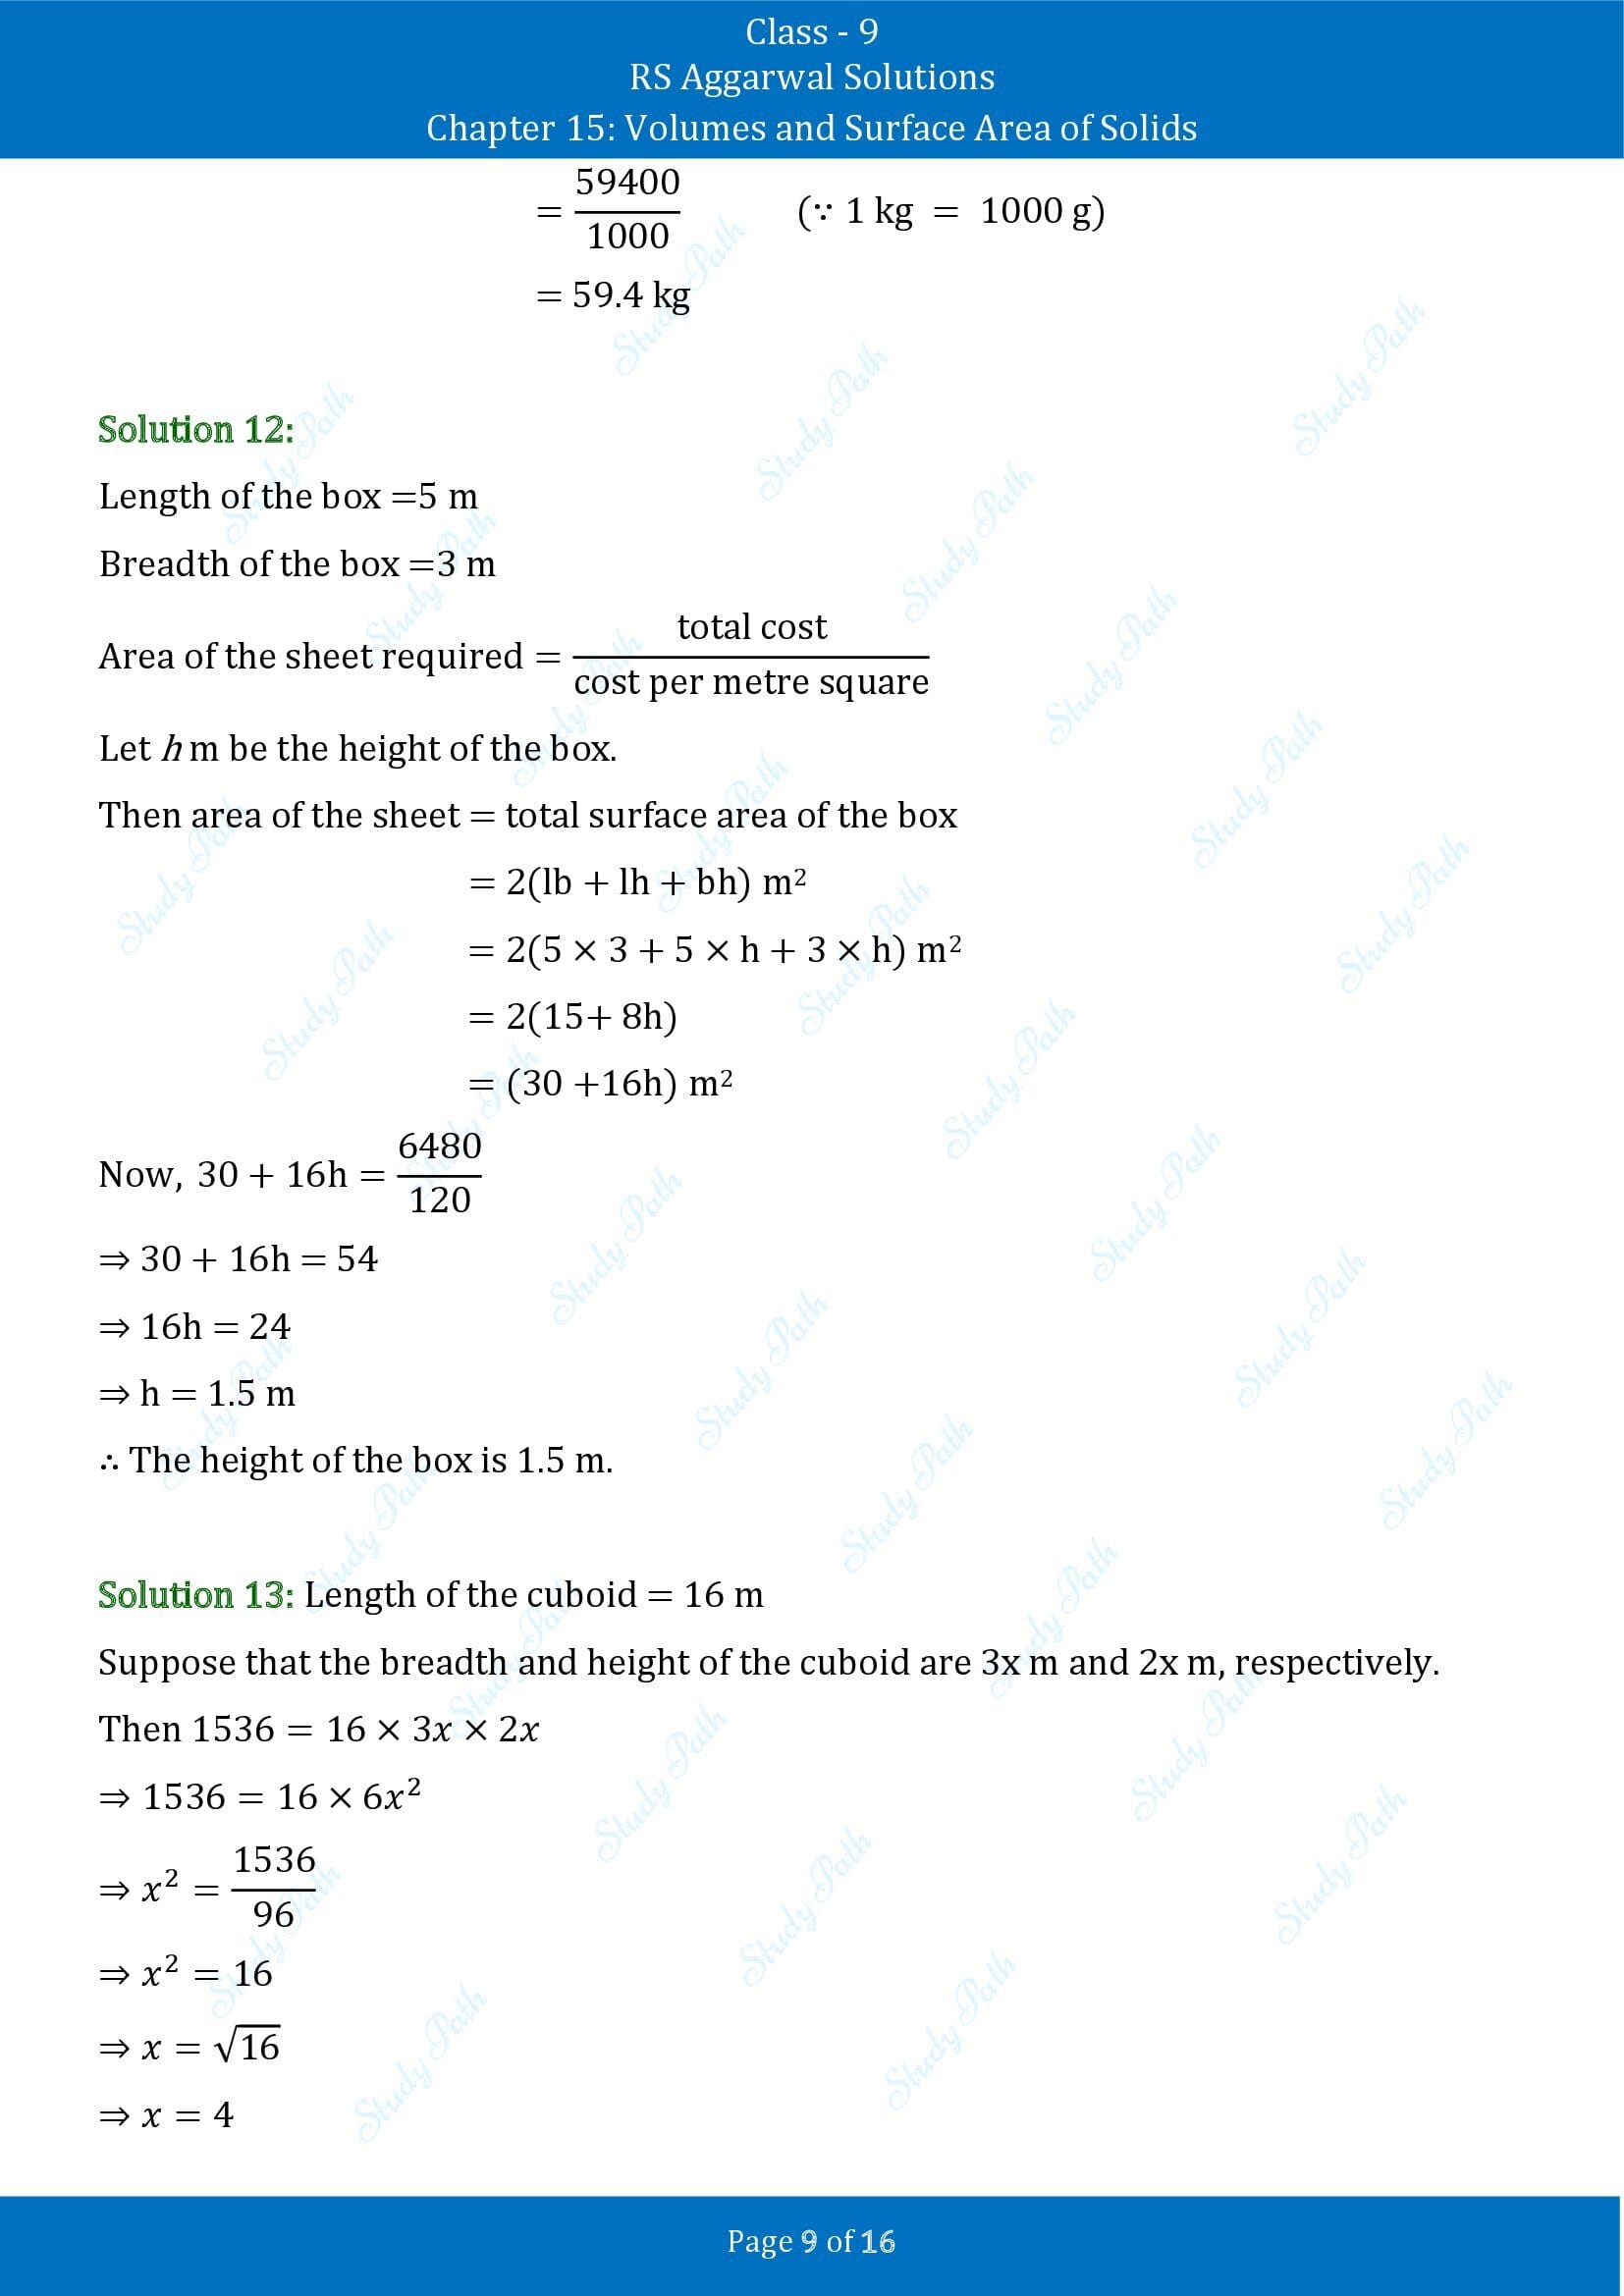 RS Aggarwal Solutions Class 9 Chapter 15 Volumes and Surface Area of Solids Exercise 15A 00009